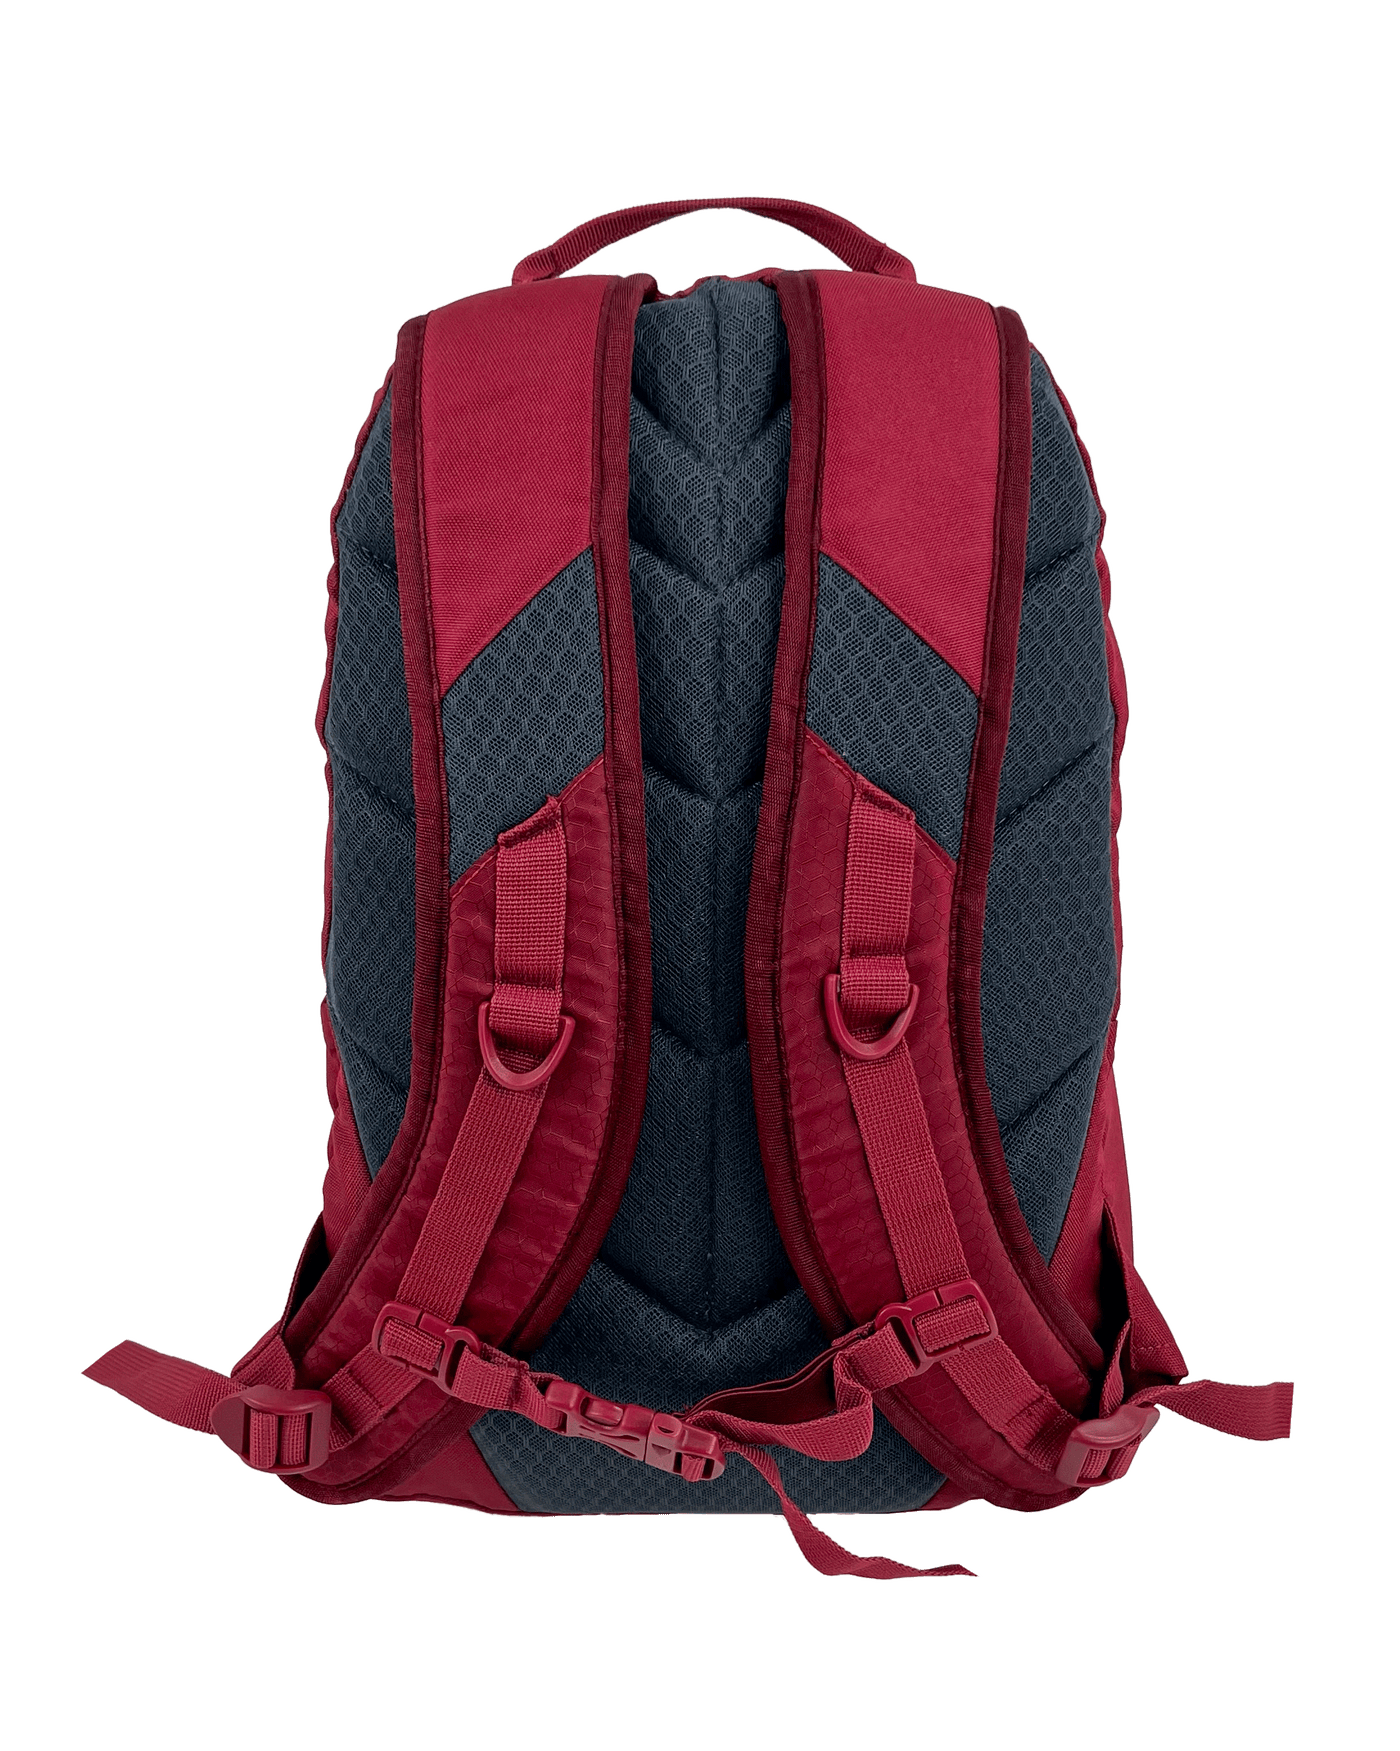 Booderee Backpack